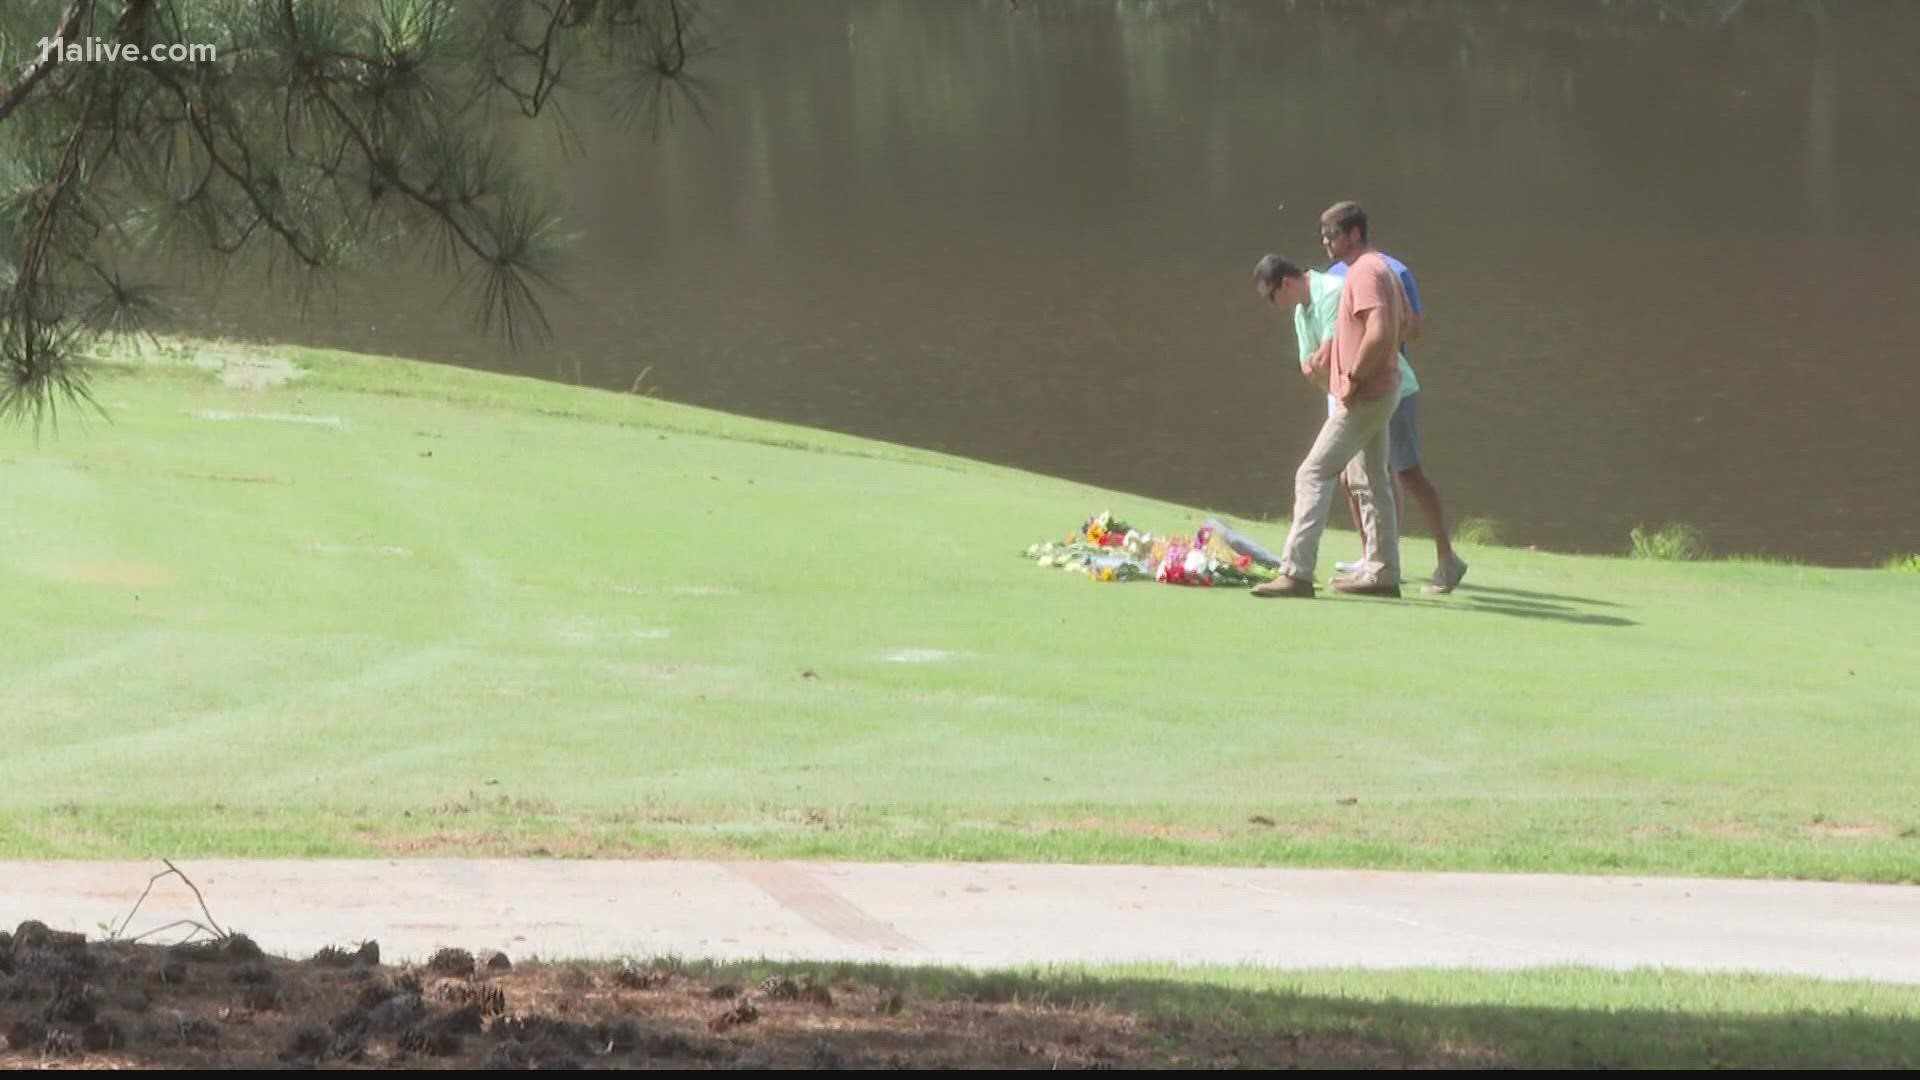 Cobb County Police are searching for a second person allegedly connected to the golf course murders this past summer.